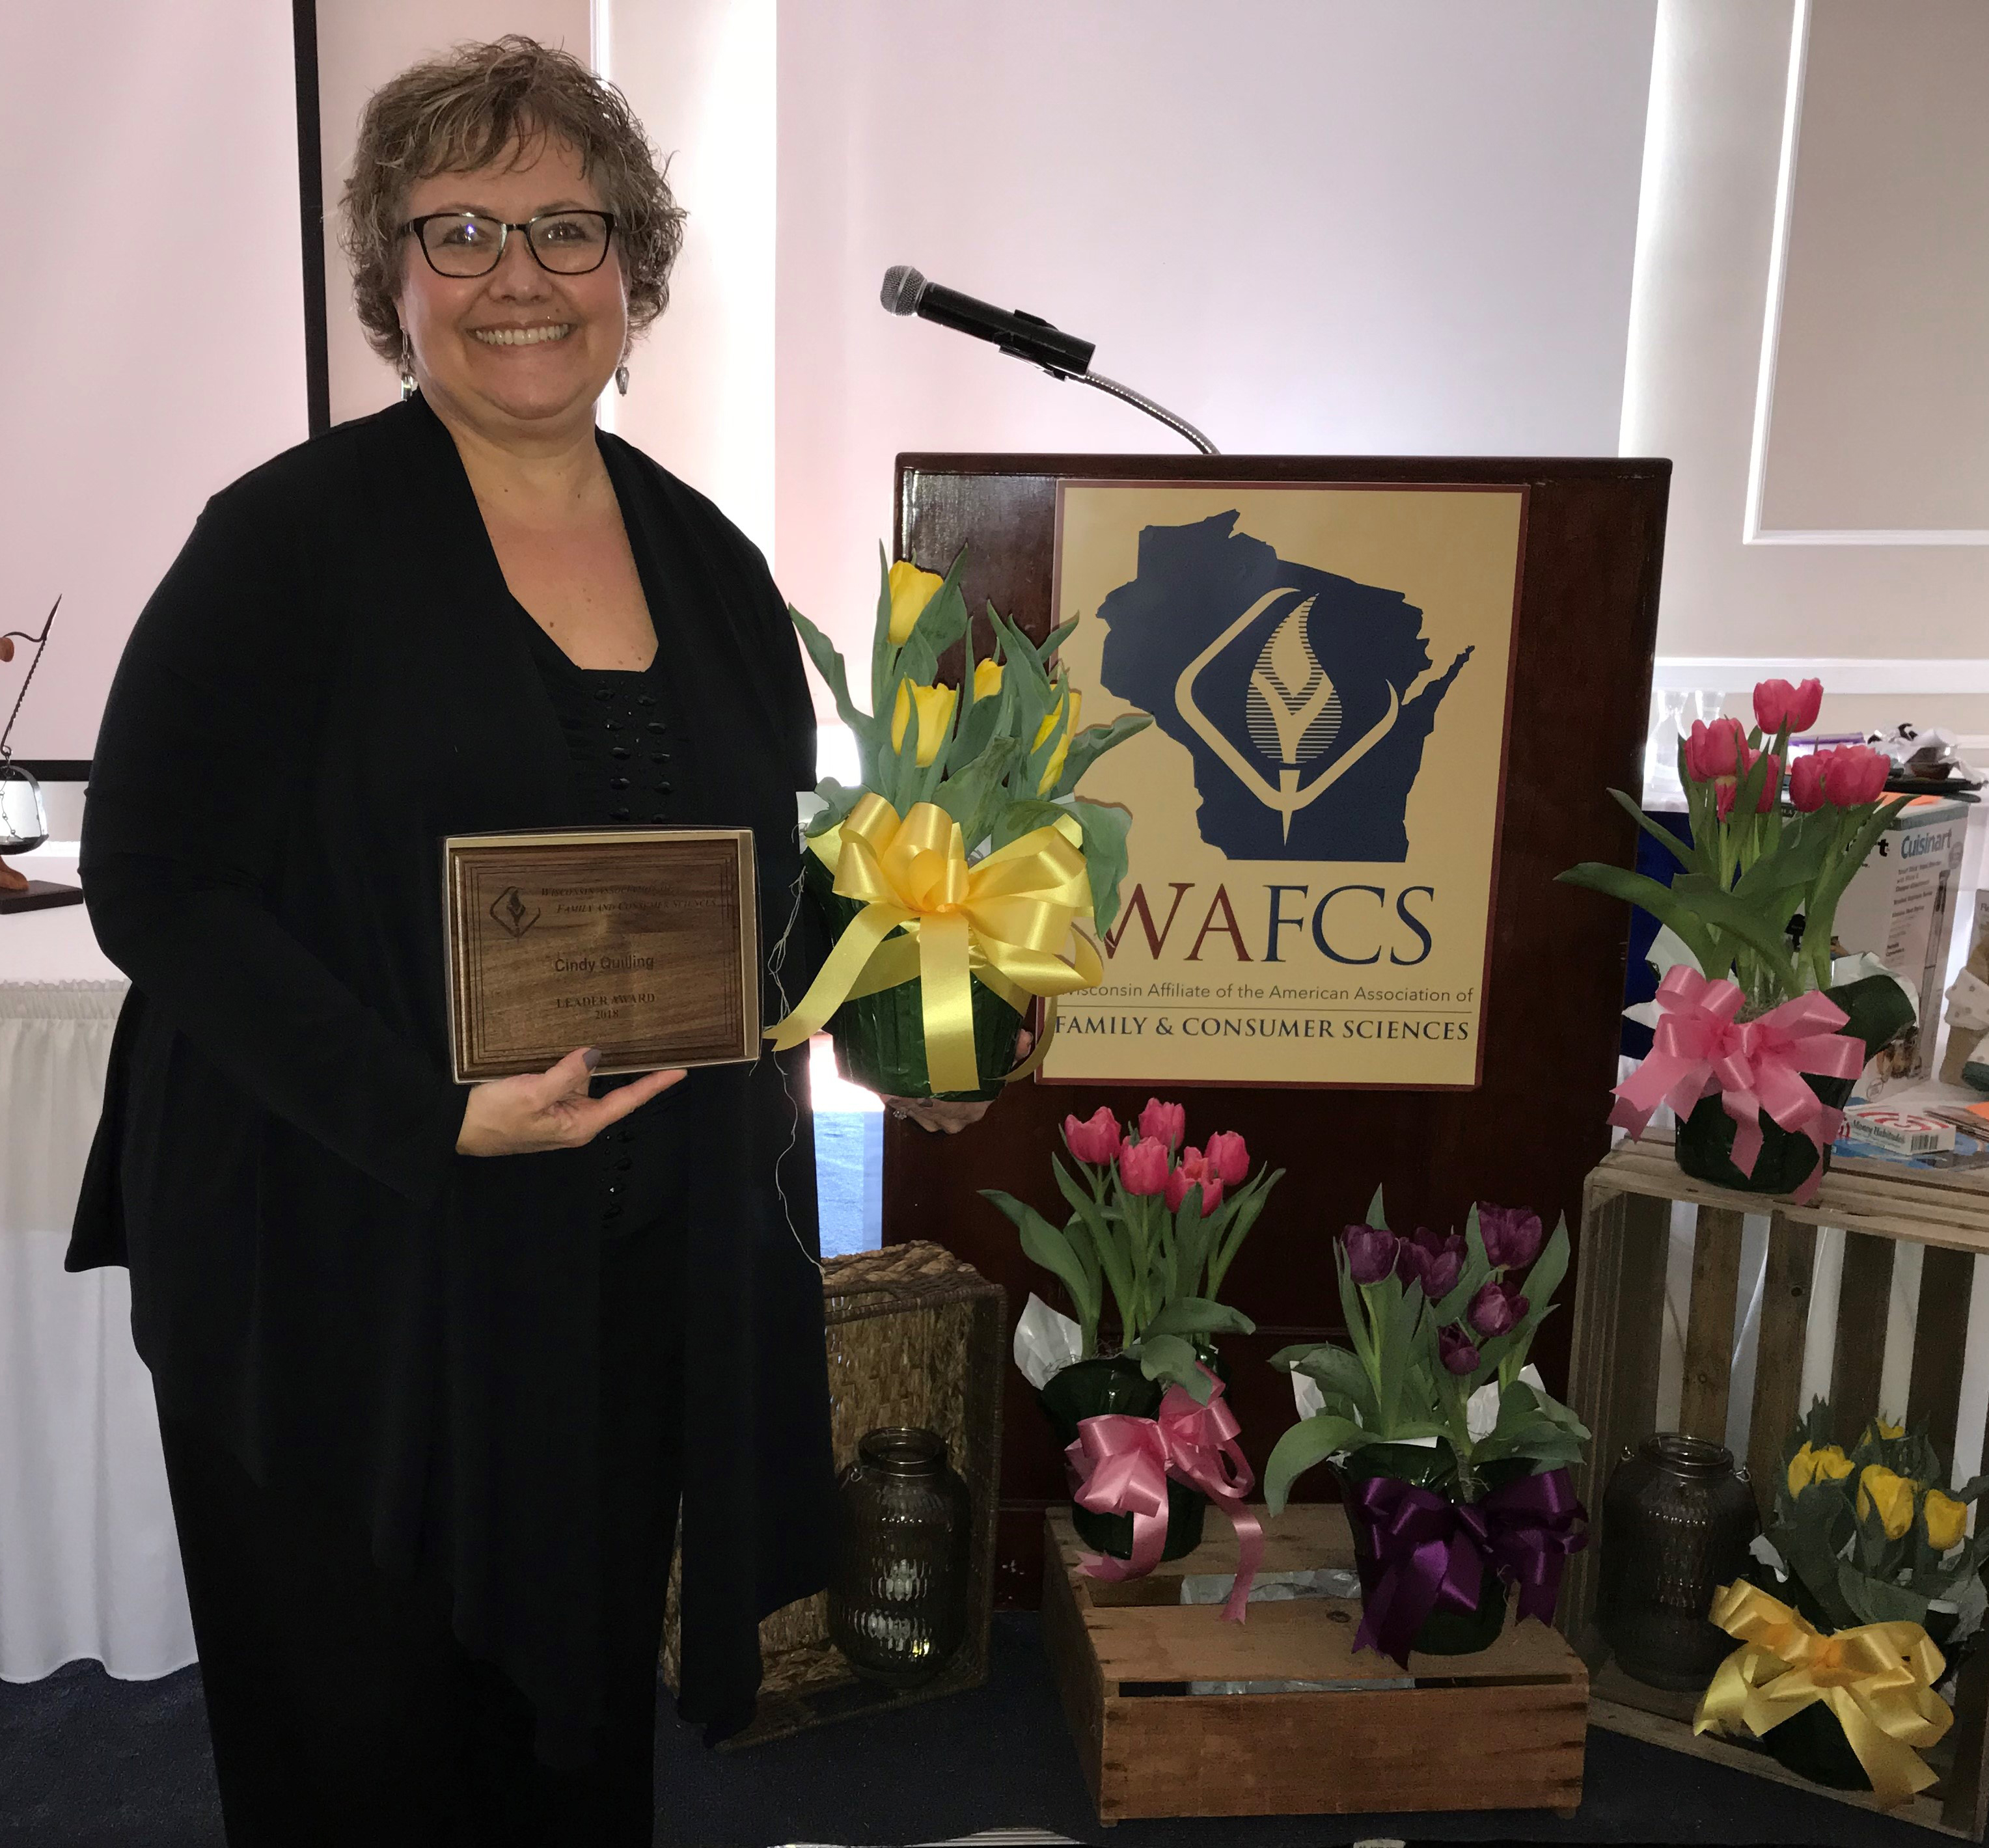 Cindy Quilling, UW-Stout student teacher supervisor in the areas of family and consumer sciences and health, received the 2018 Leader of the Year by the Wisconsin Association of Family and Consumer Sciences.